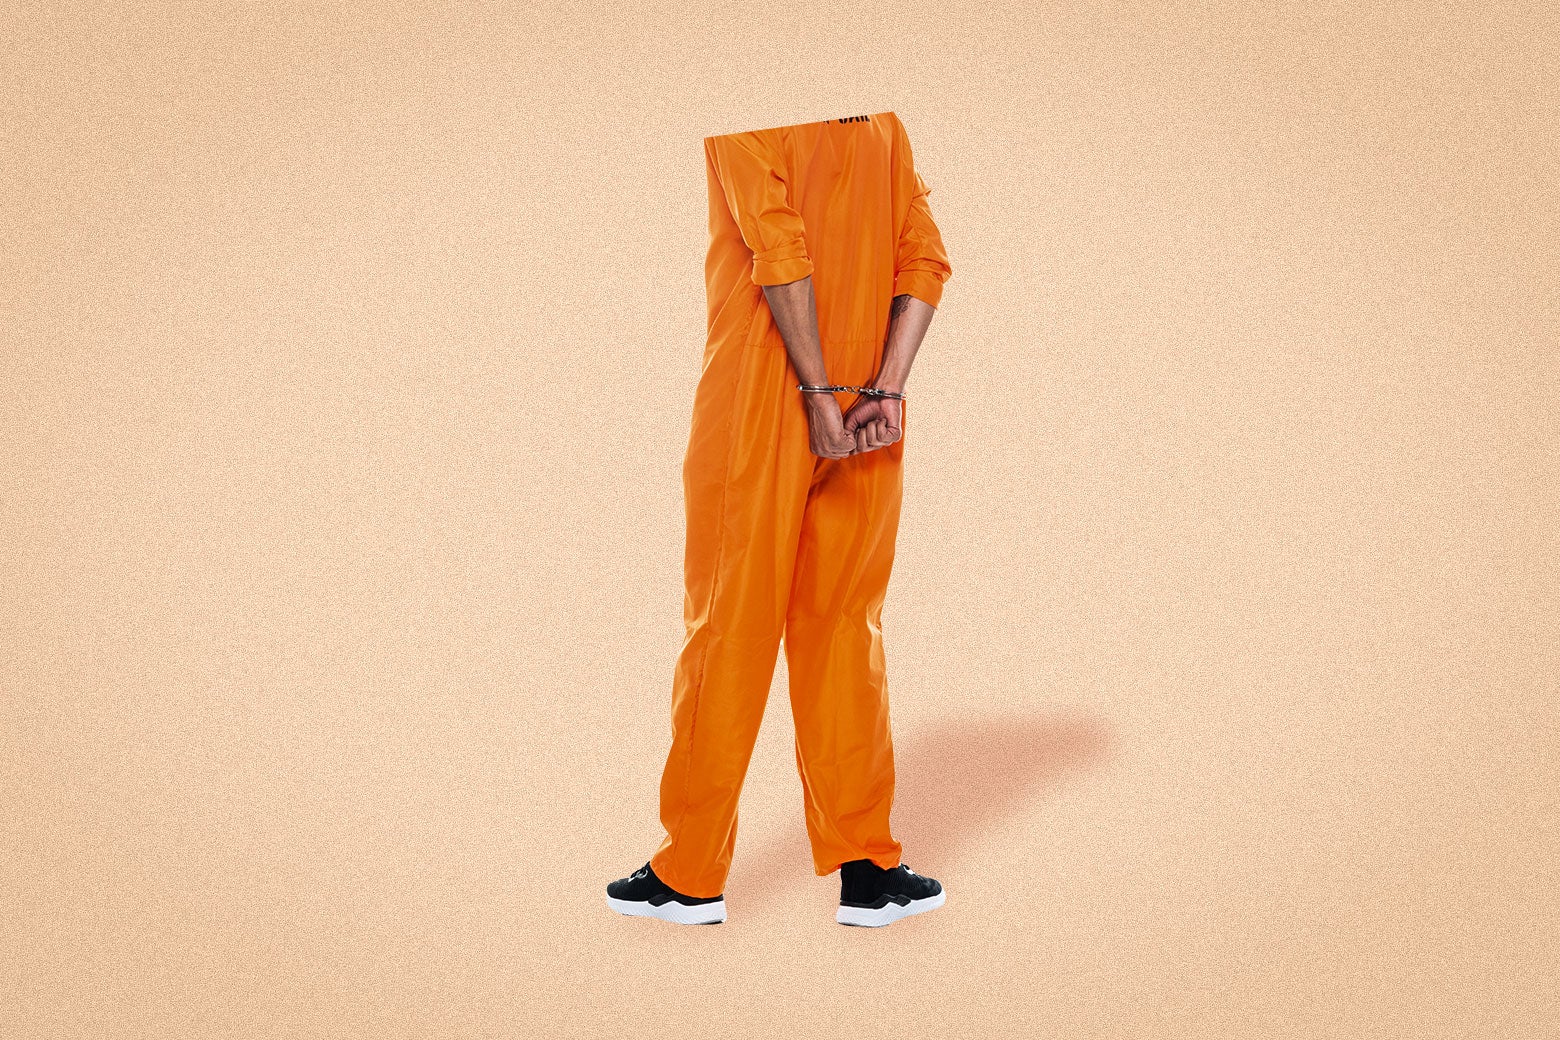 An incarcerated person wearing an orange jumpsuit and with his hands cuffed behind his back. 